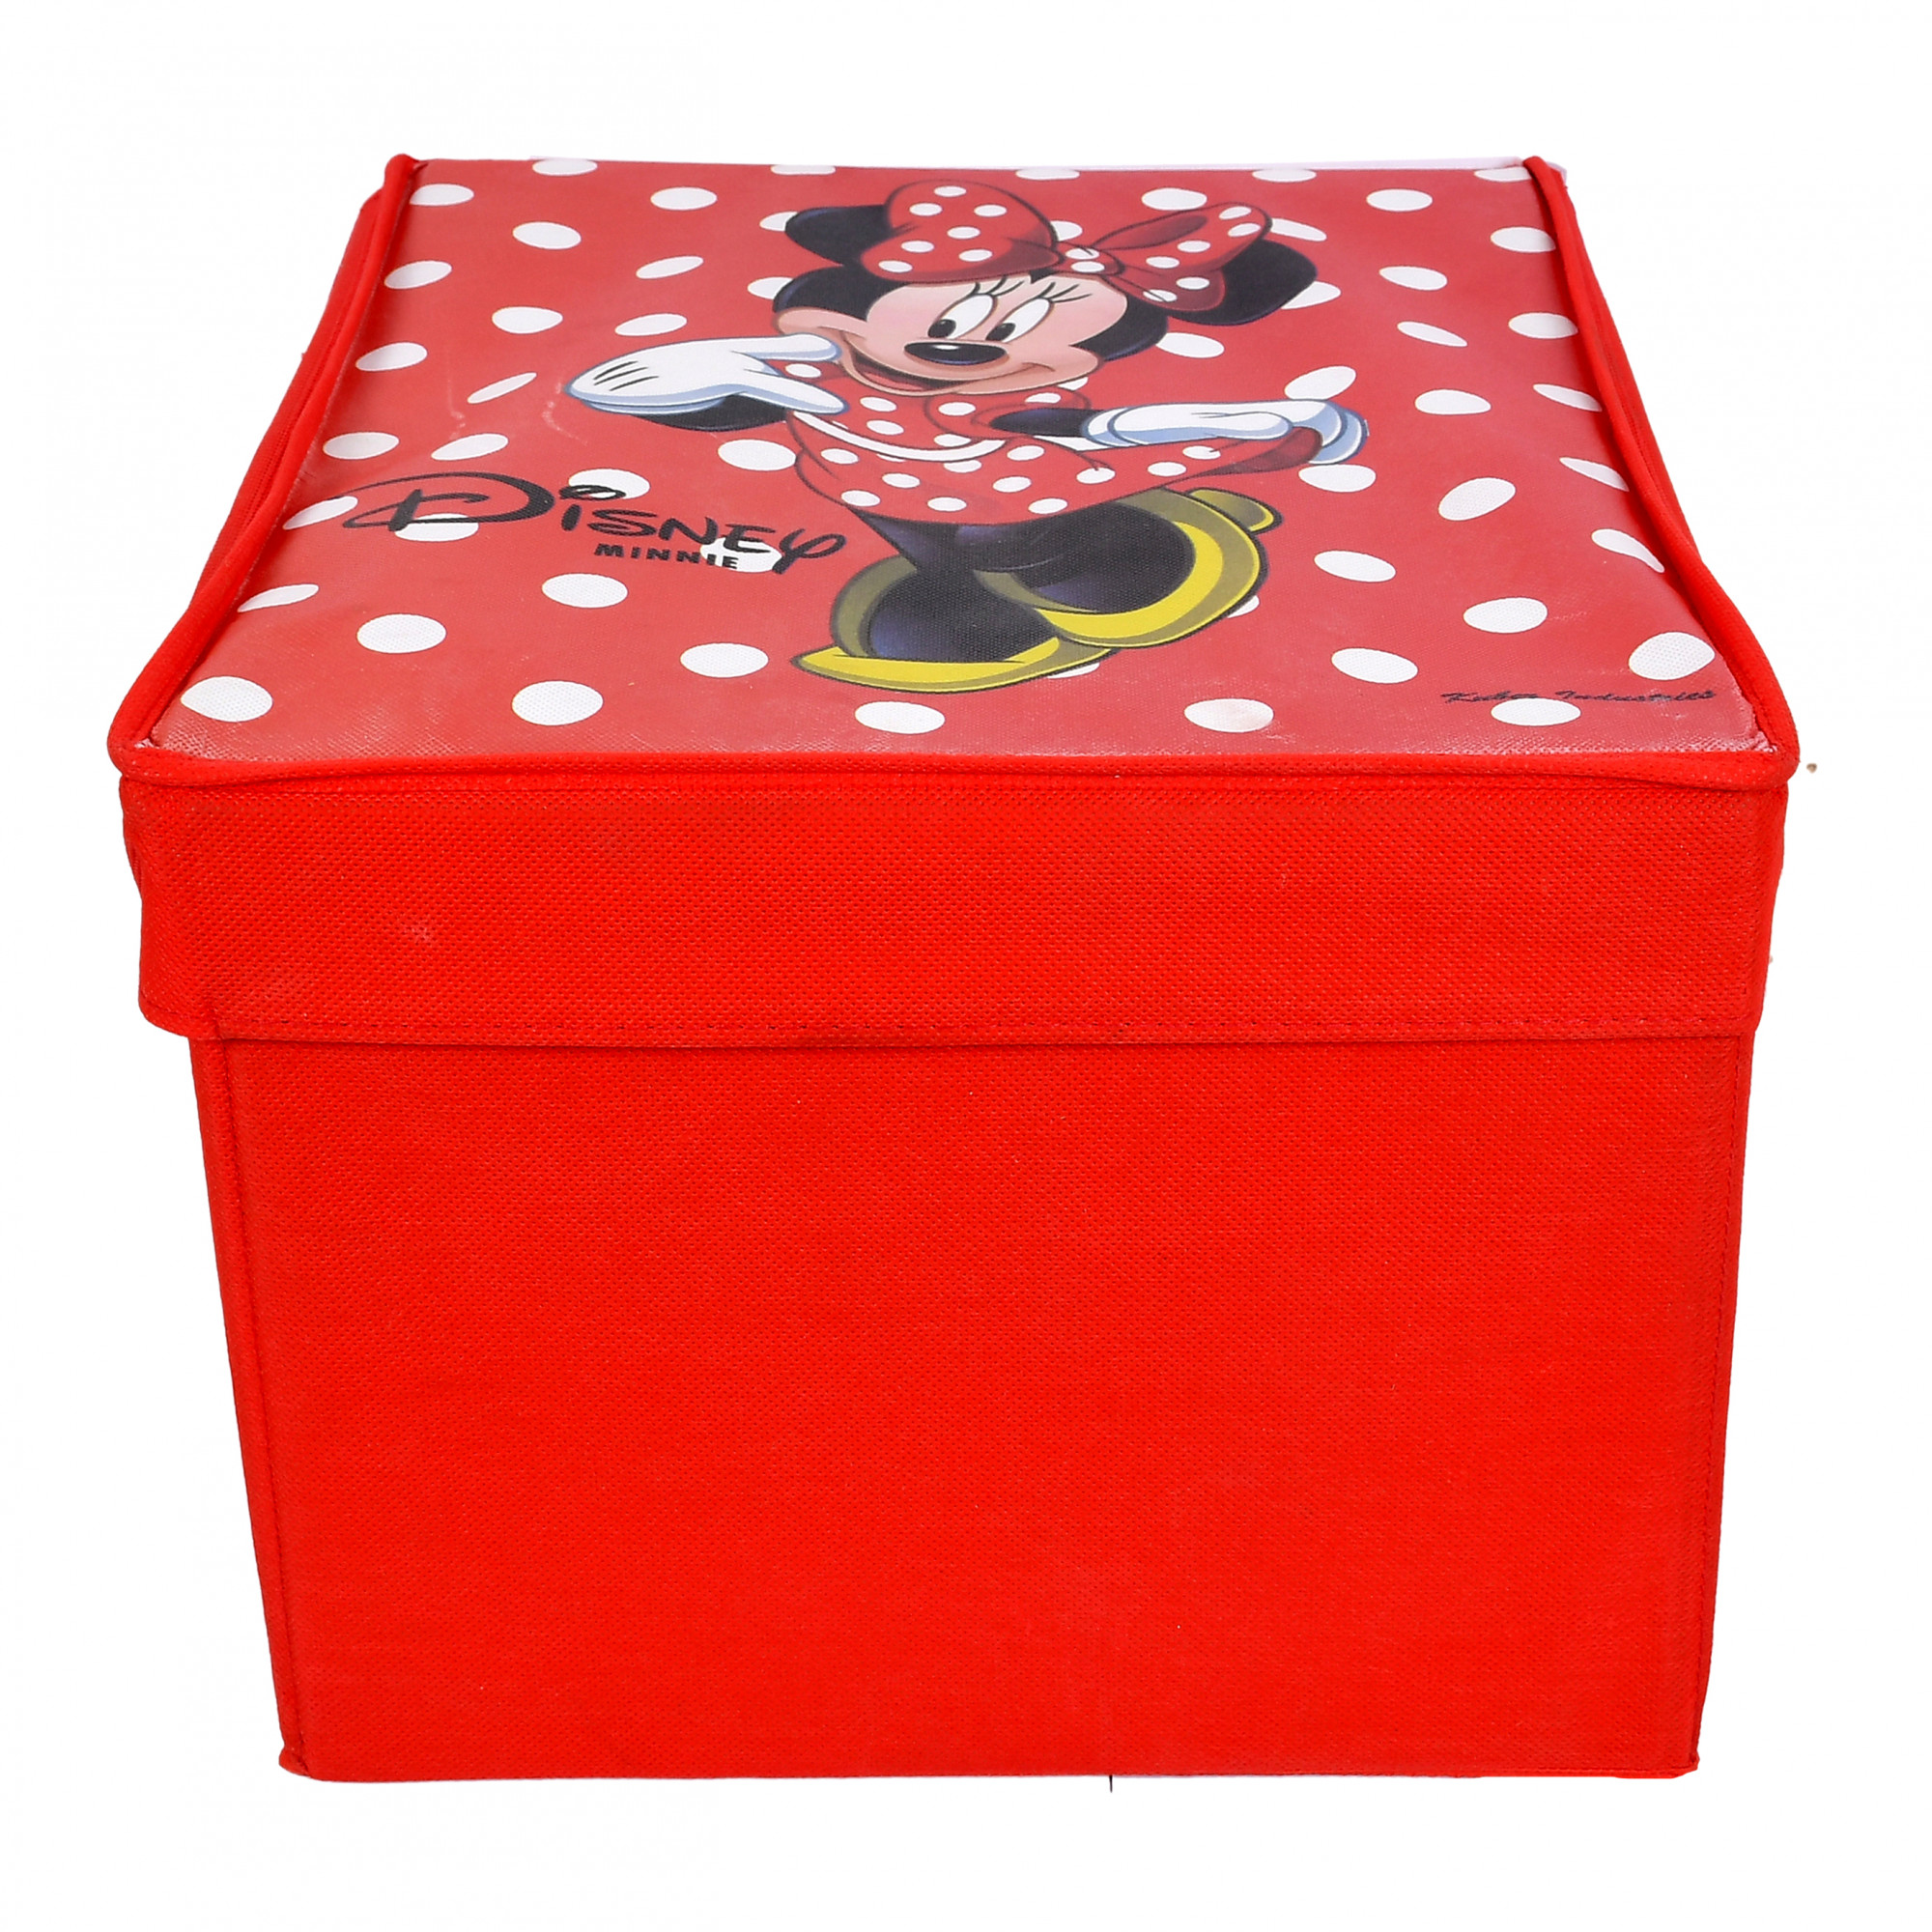 Kuber Industries Disney Minnie Print Non Woven Fabric Foldable Saree Cover Storage Organizer Box with With Lid, Extra Large (Red)-KUBMART1710